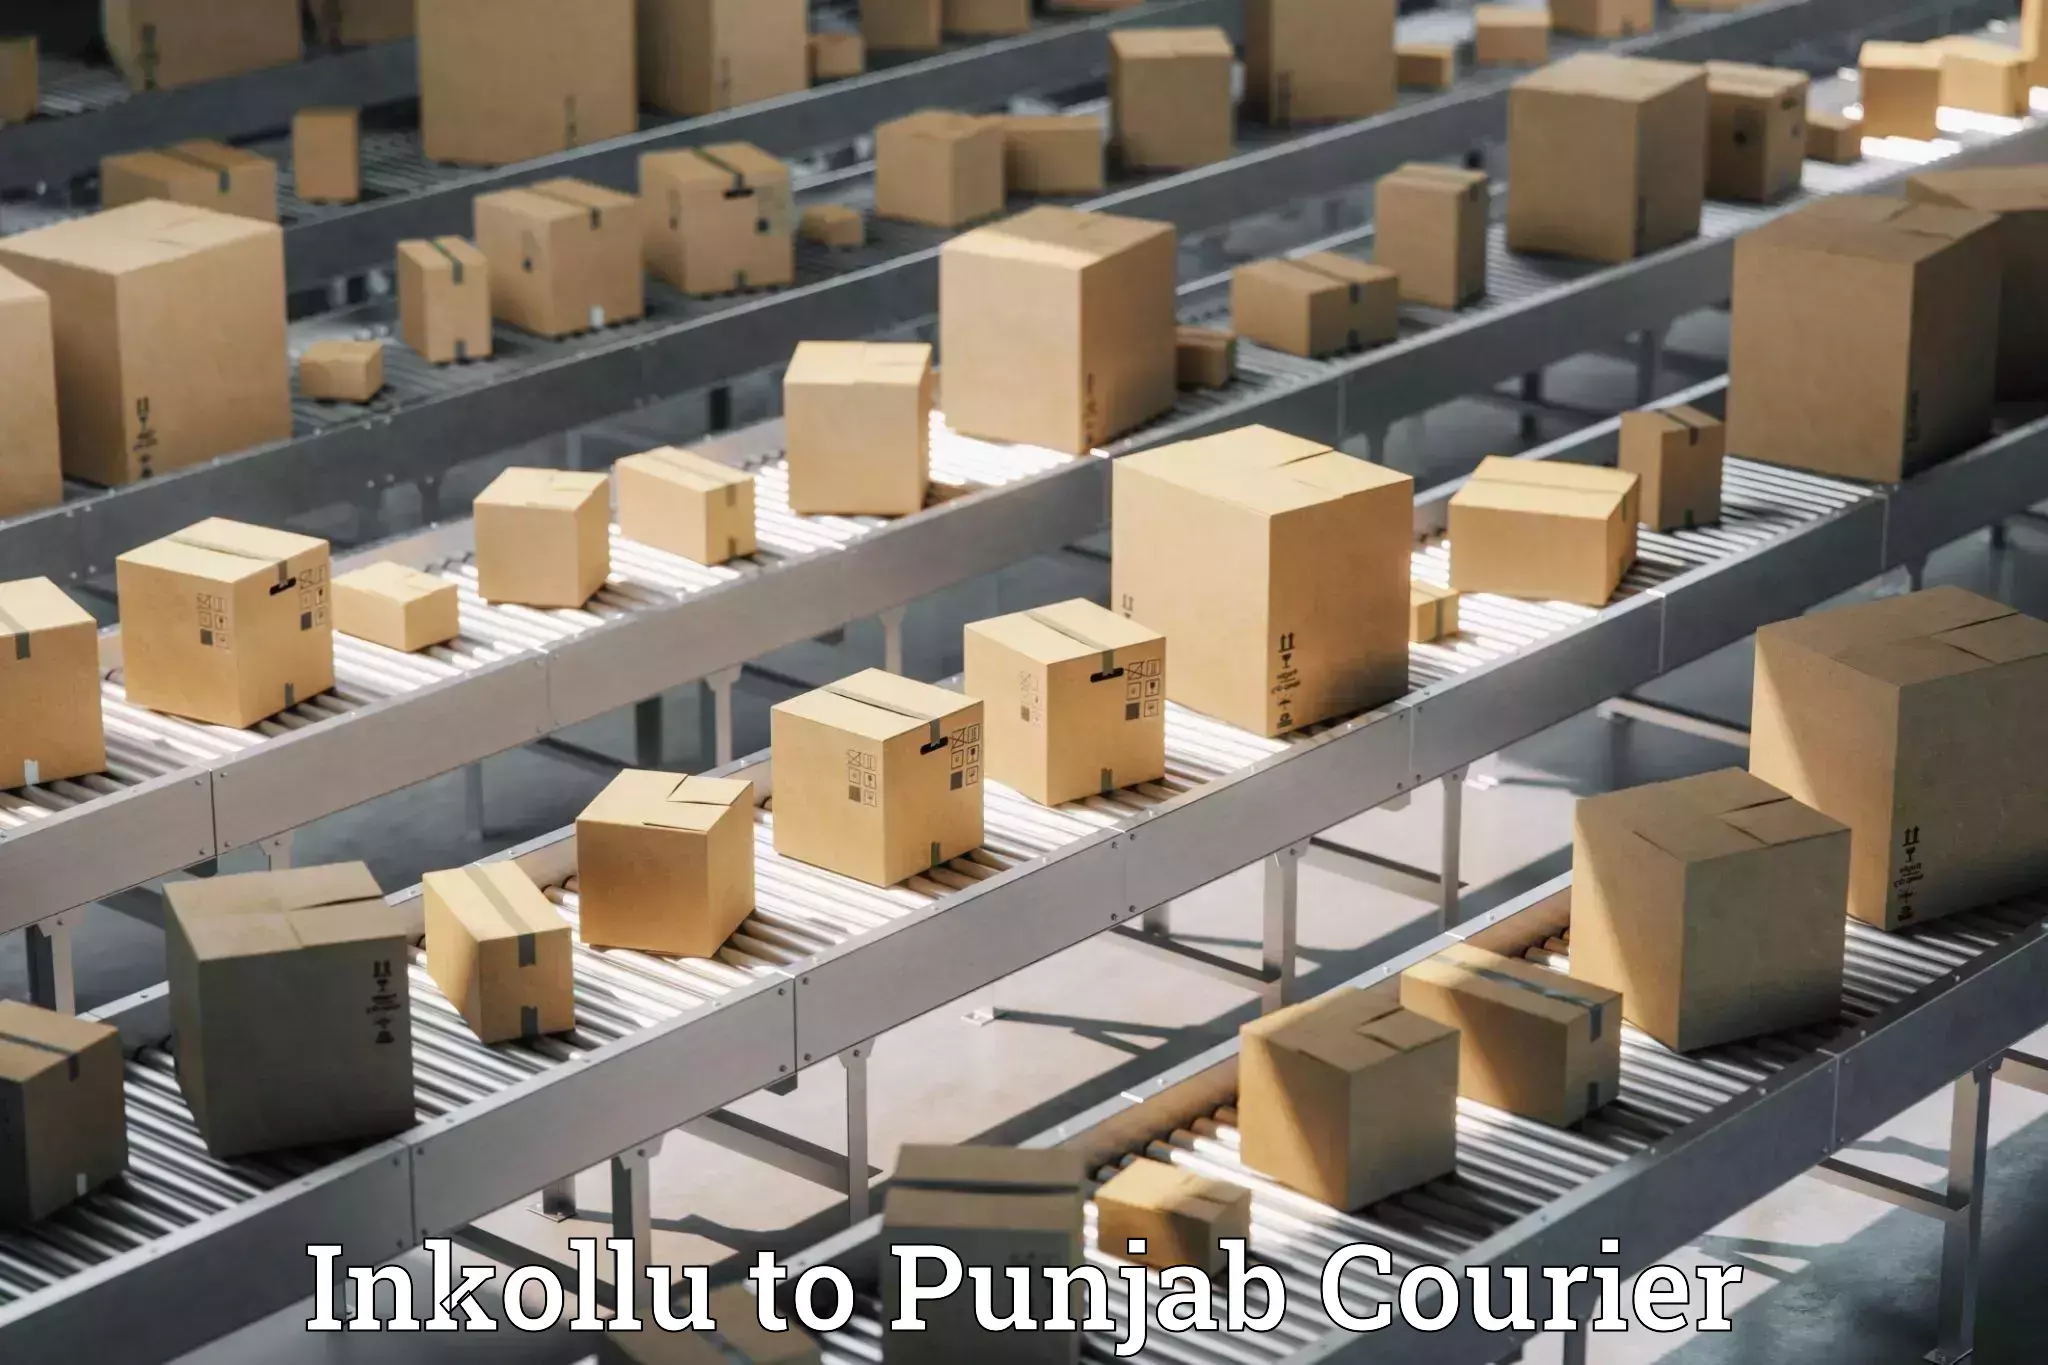 Express courier facilities Inkollu to Mohali